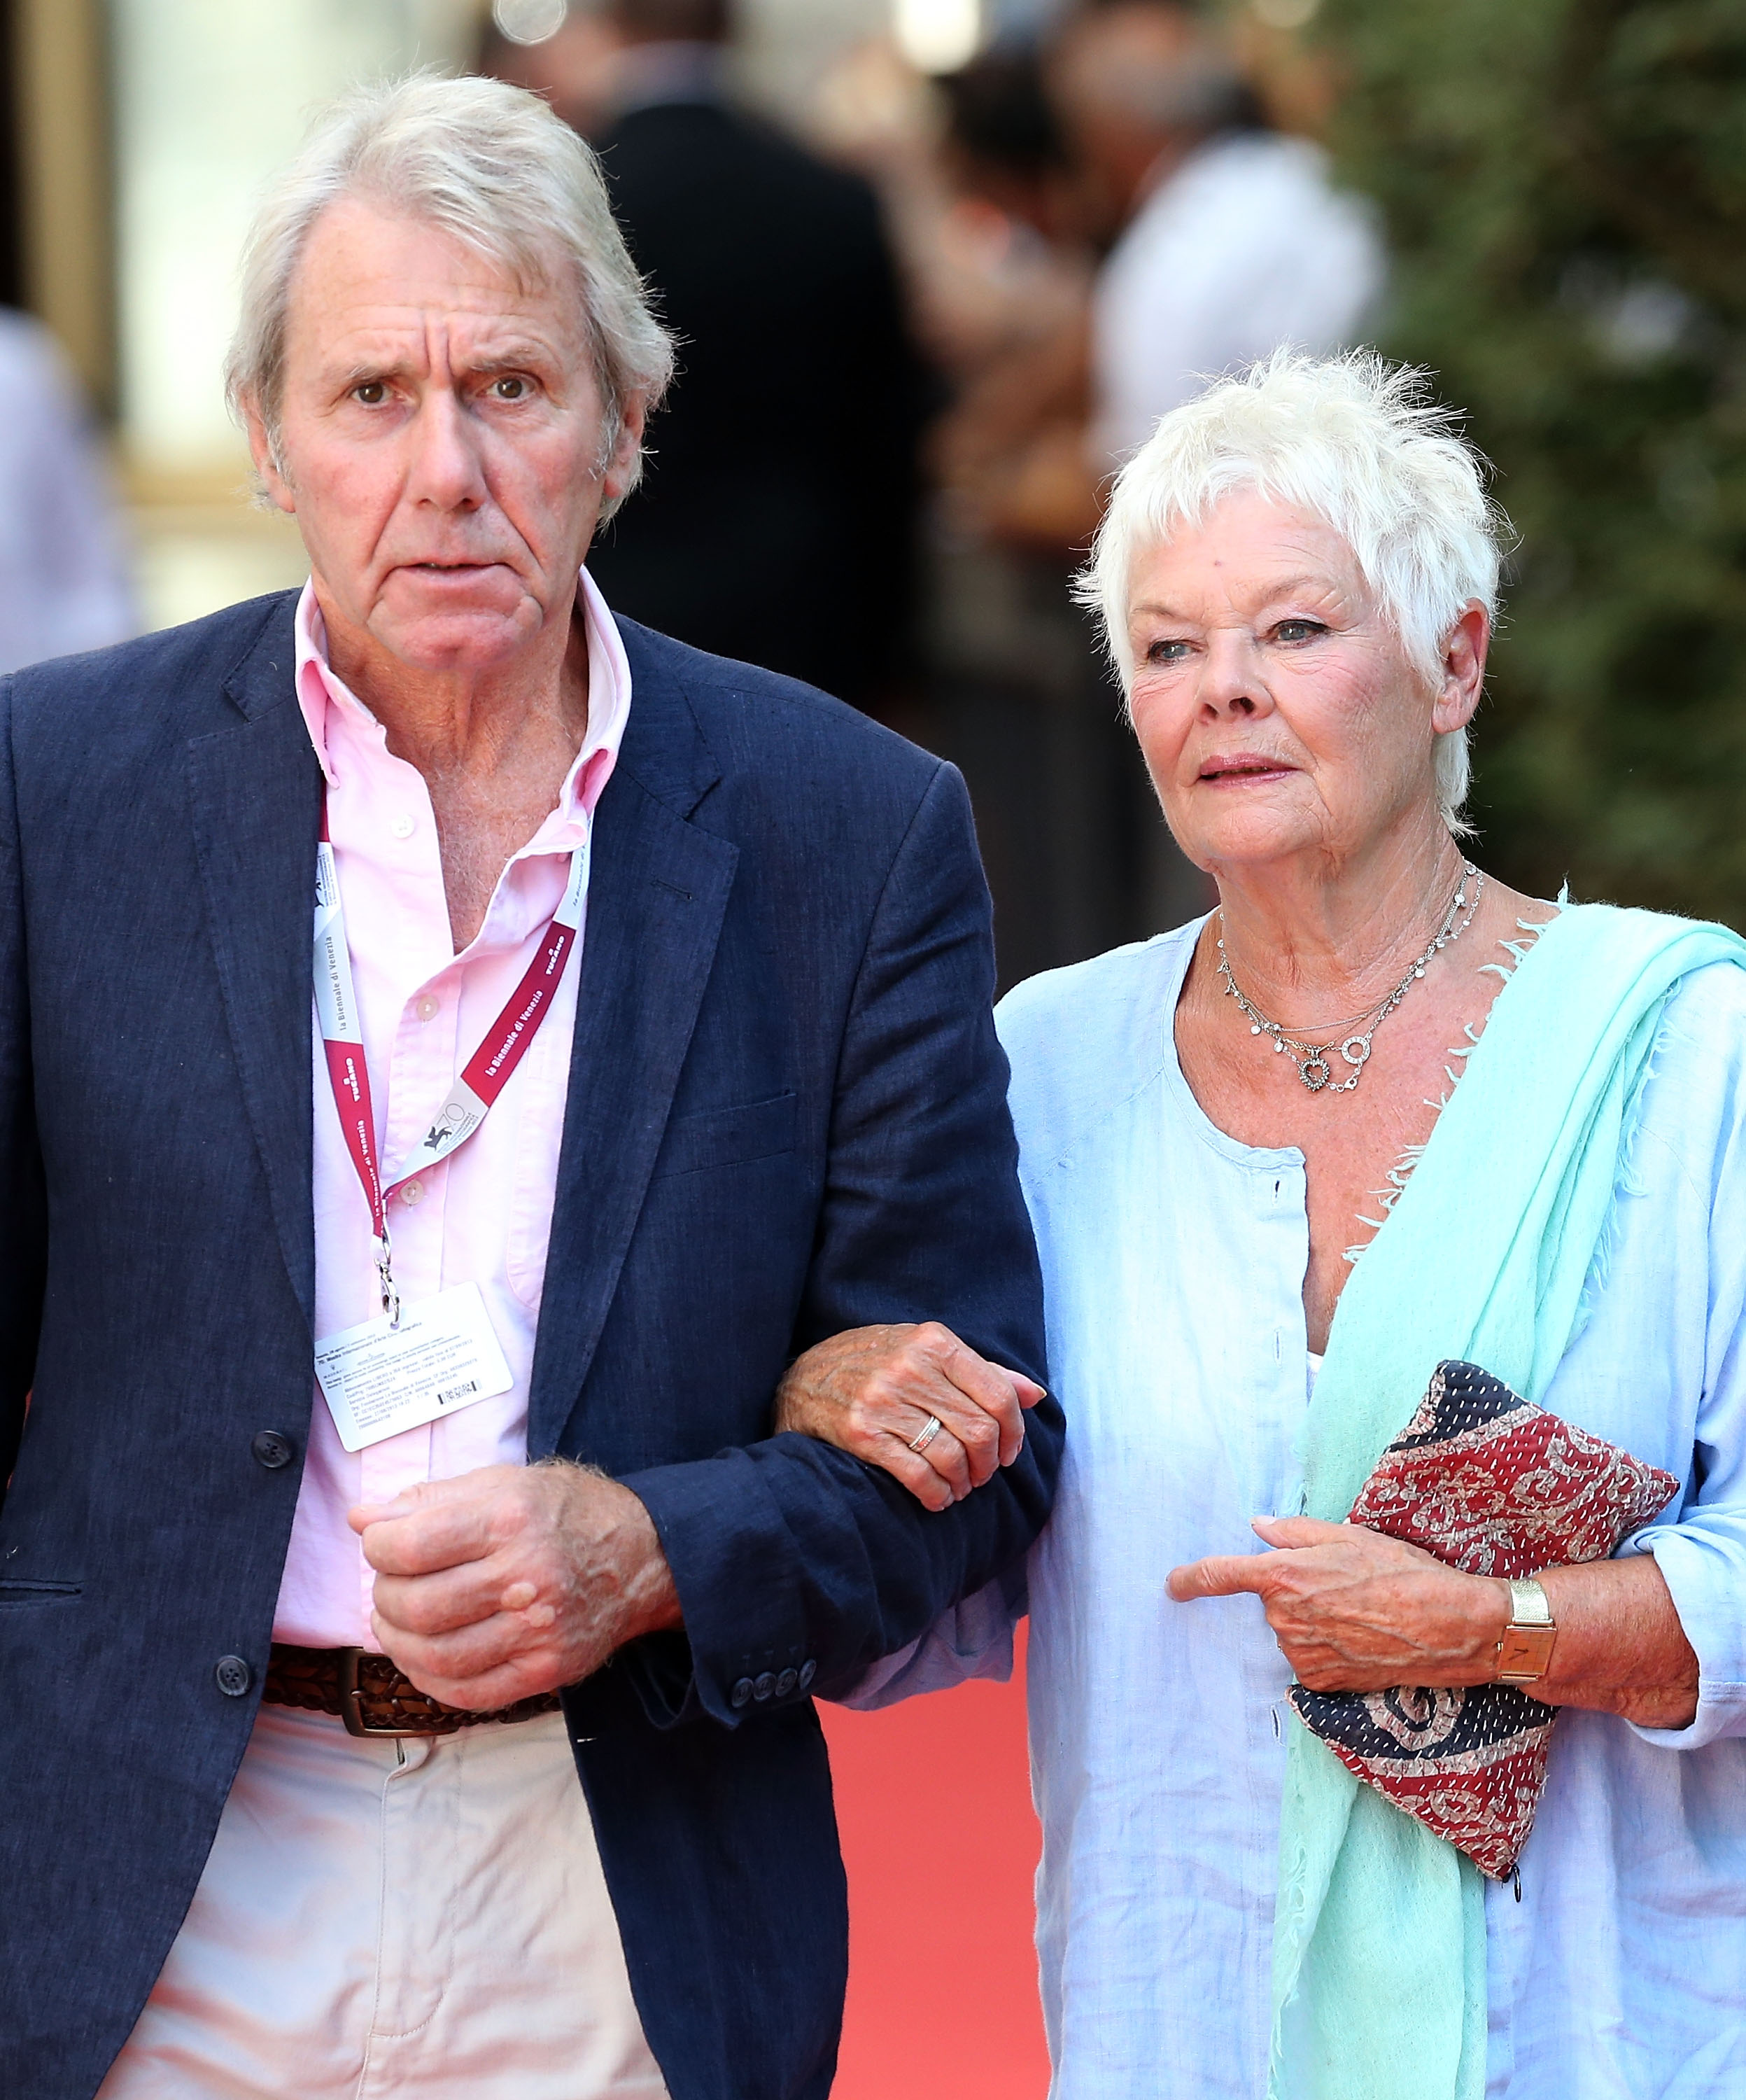 Judi Dench and David Mills attend day 4 of the 70th Venice International Film Festival on August 31, 2013 in Venice, Italy. | Source: Getty Images